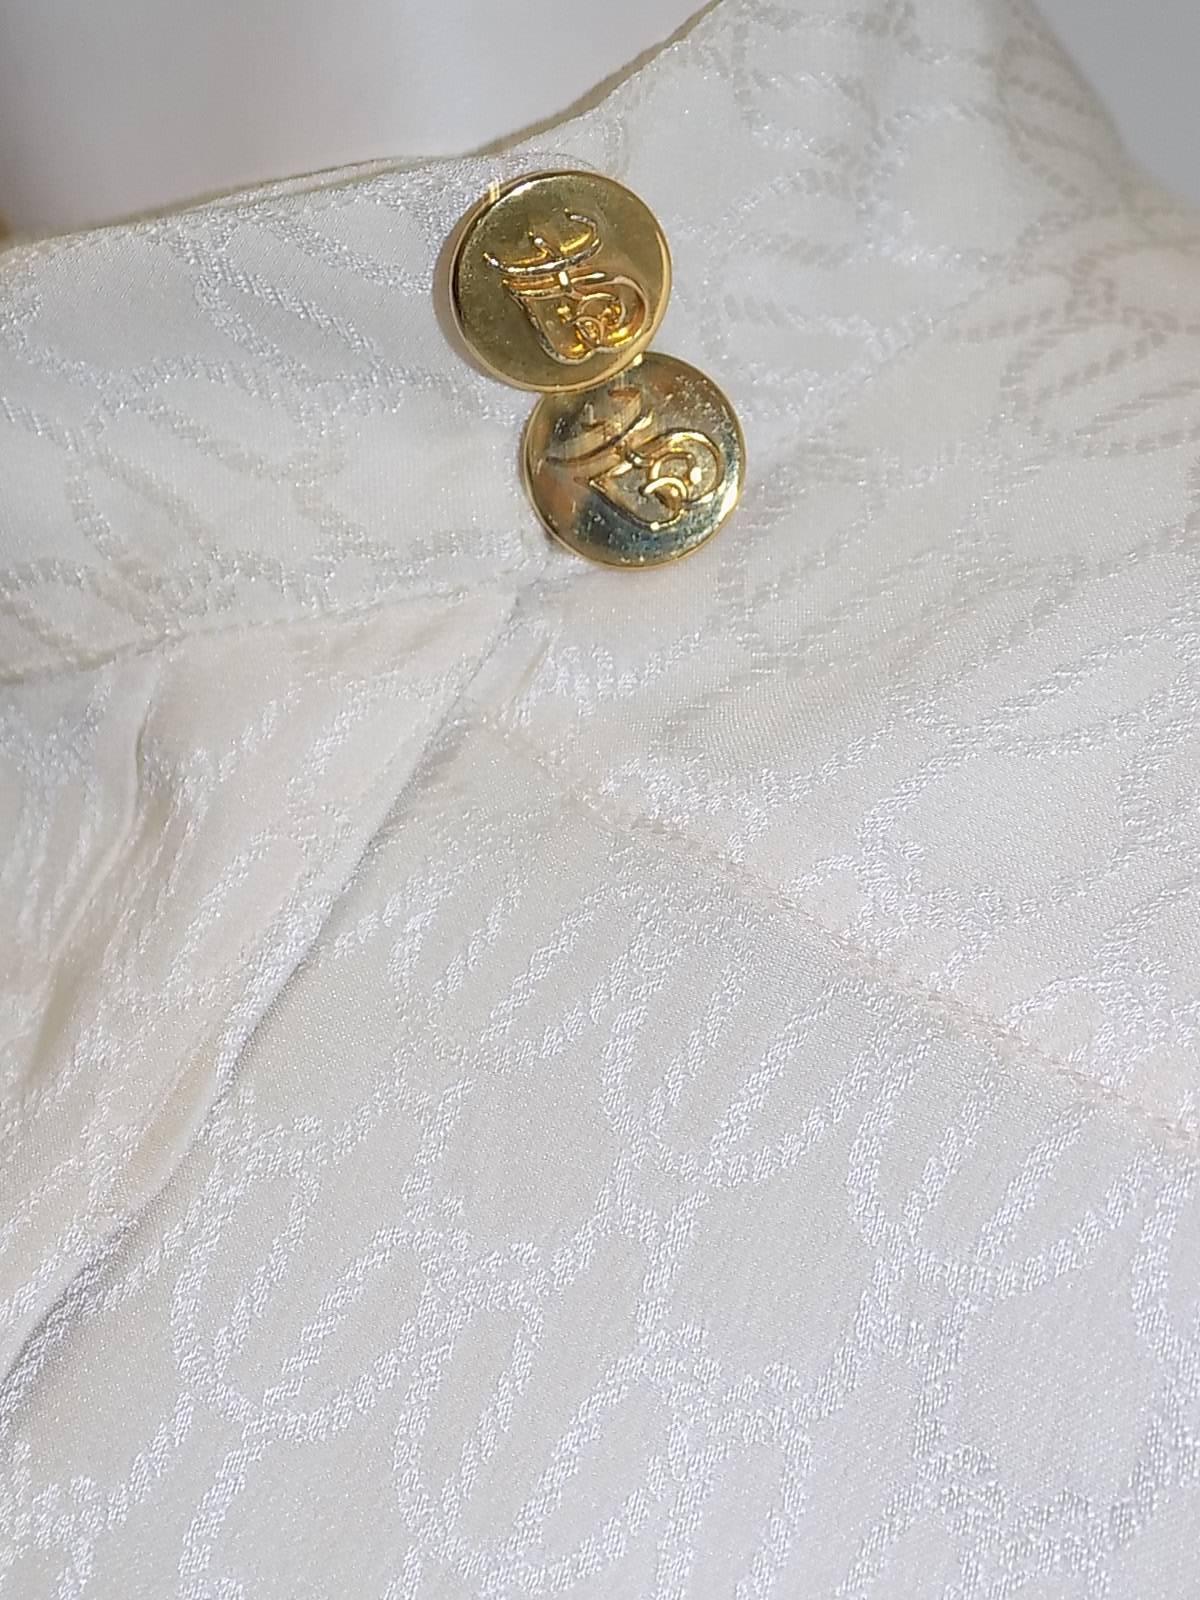 Hermes Stunning Jacquard silk print creme blouse w gold buttons In Excellent Condition For Sale In New York, NY